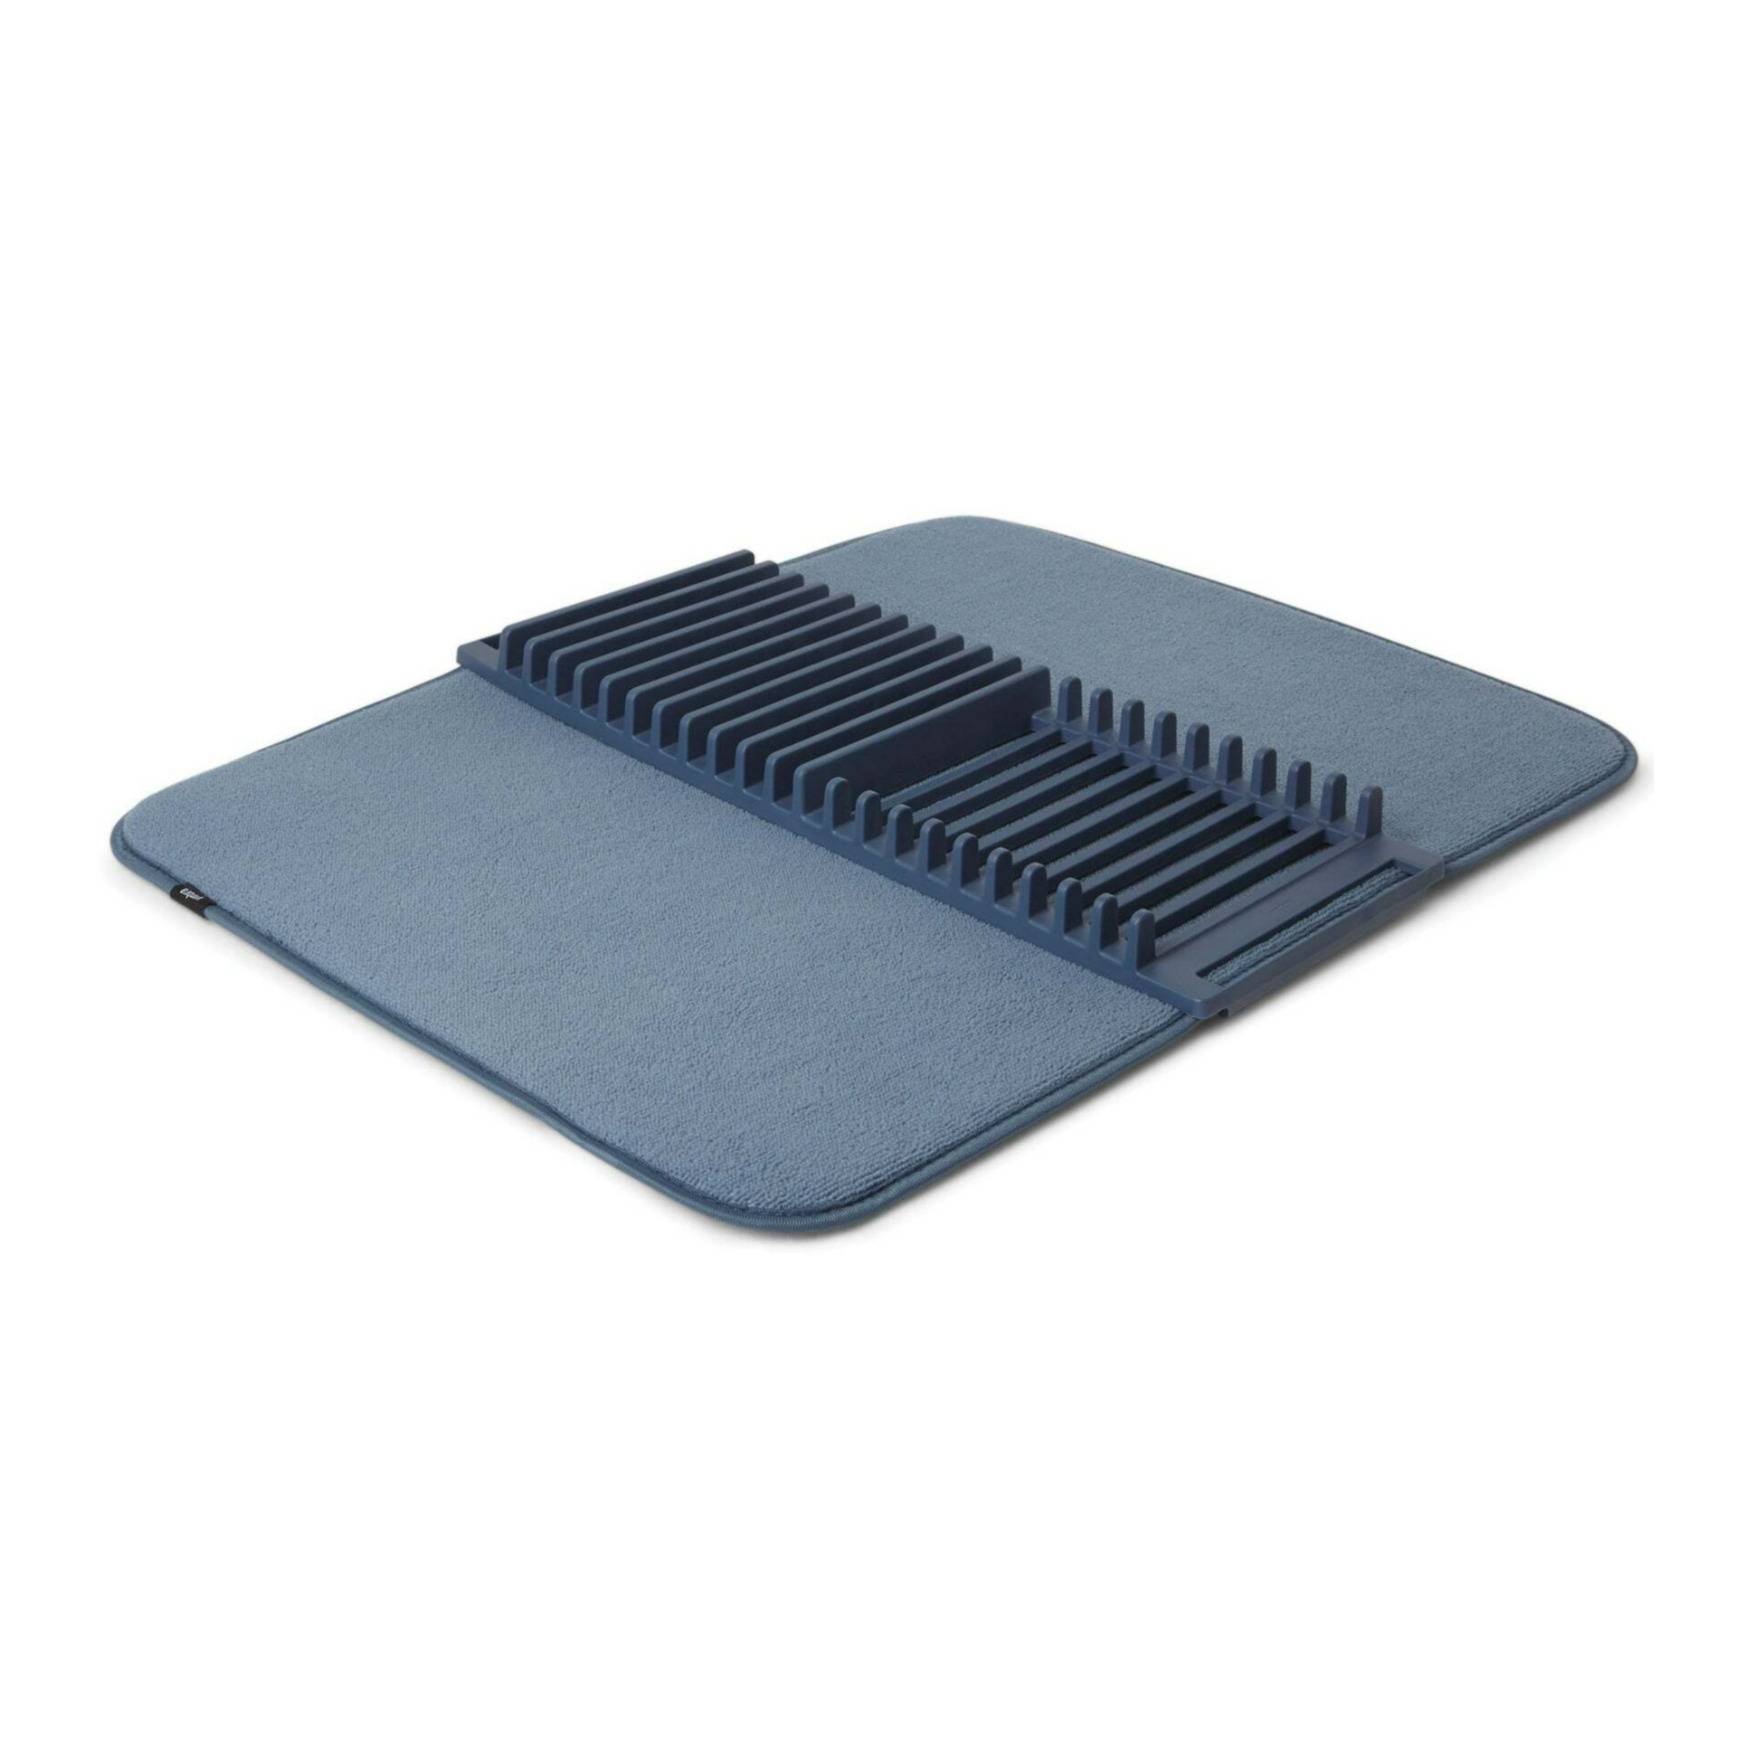 Umbra Udry Microfiber Machine-Washable Drying Mat with Removable and Foldable Dish Rack Tray (Denim)